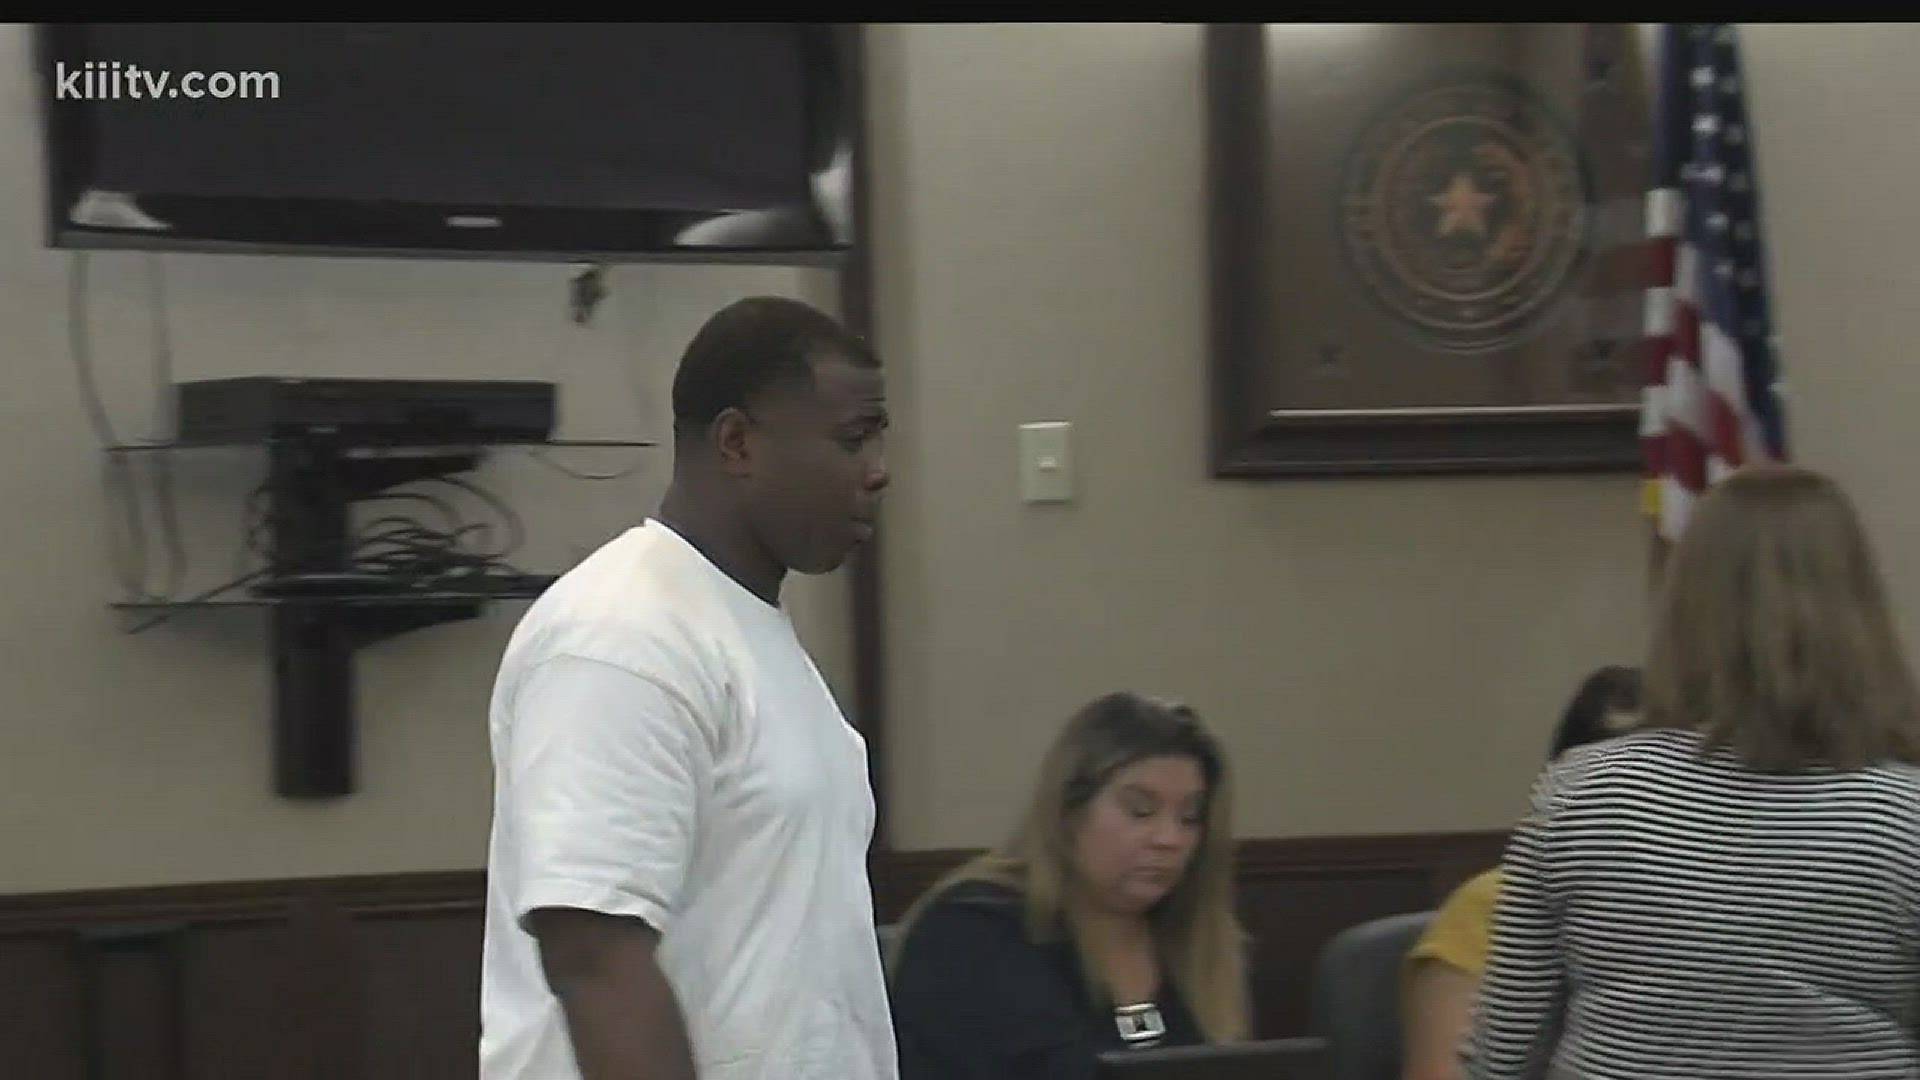 One of the men accused of killing a Coastal Bend gun store owner pleaded guilty Wednesday at the Nueces County Courthouse.